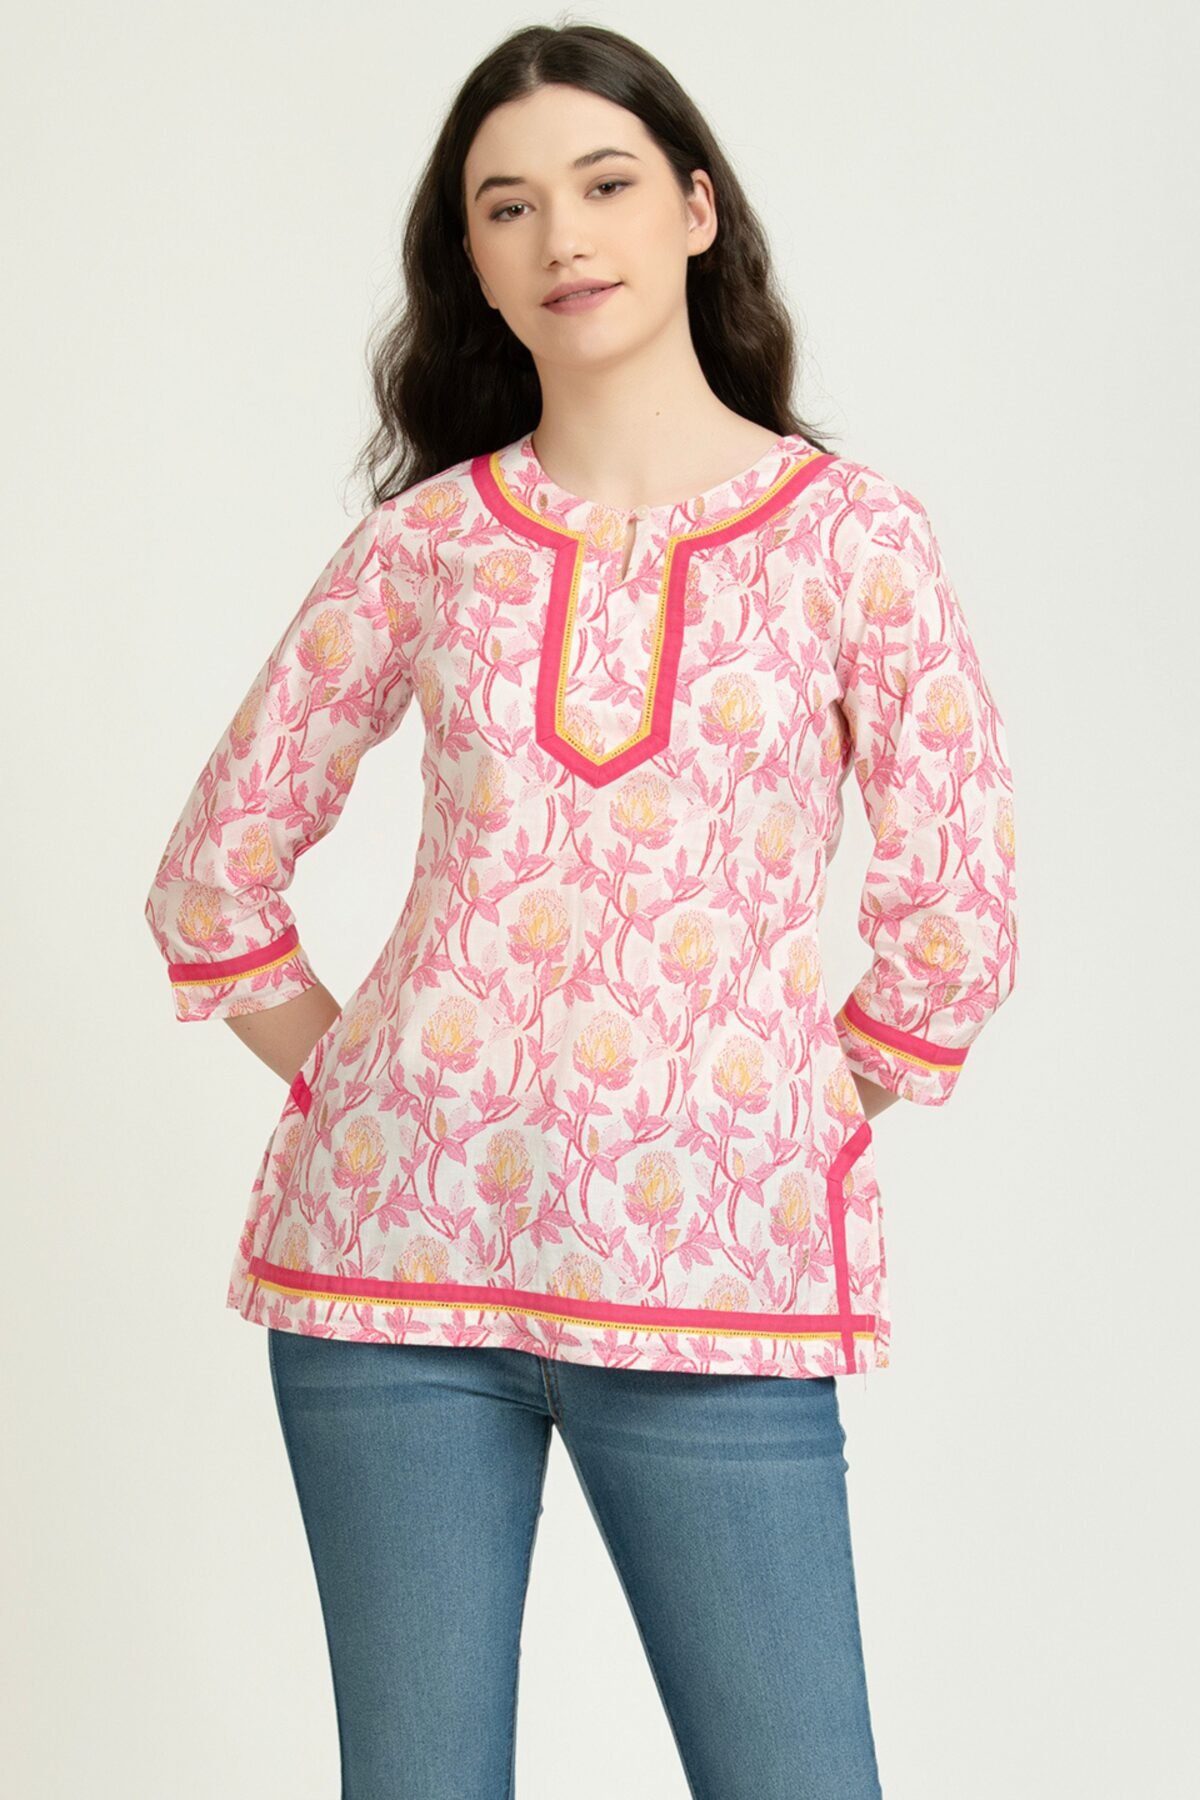 PINK FLORAL PRINTED TUNIC